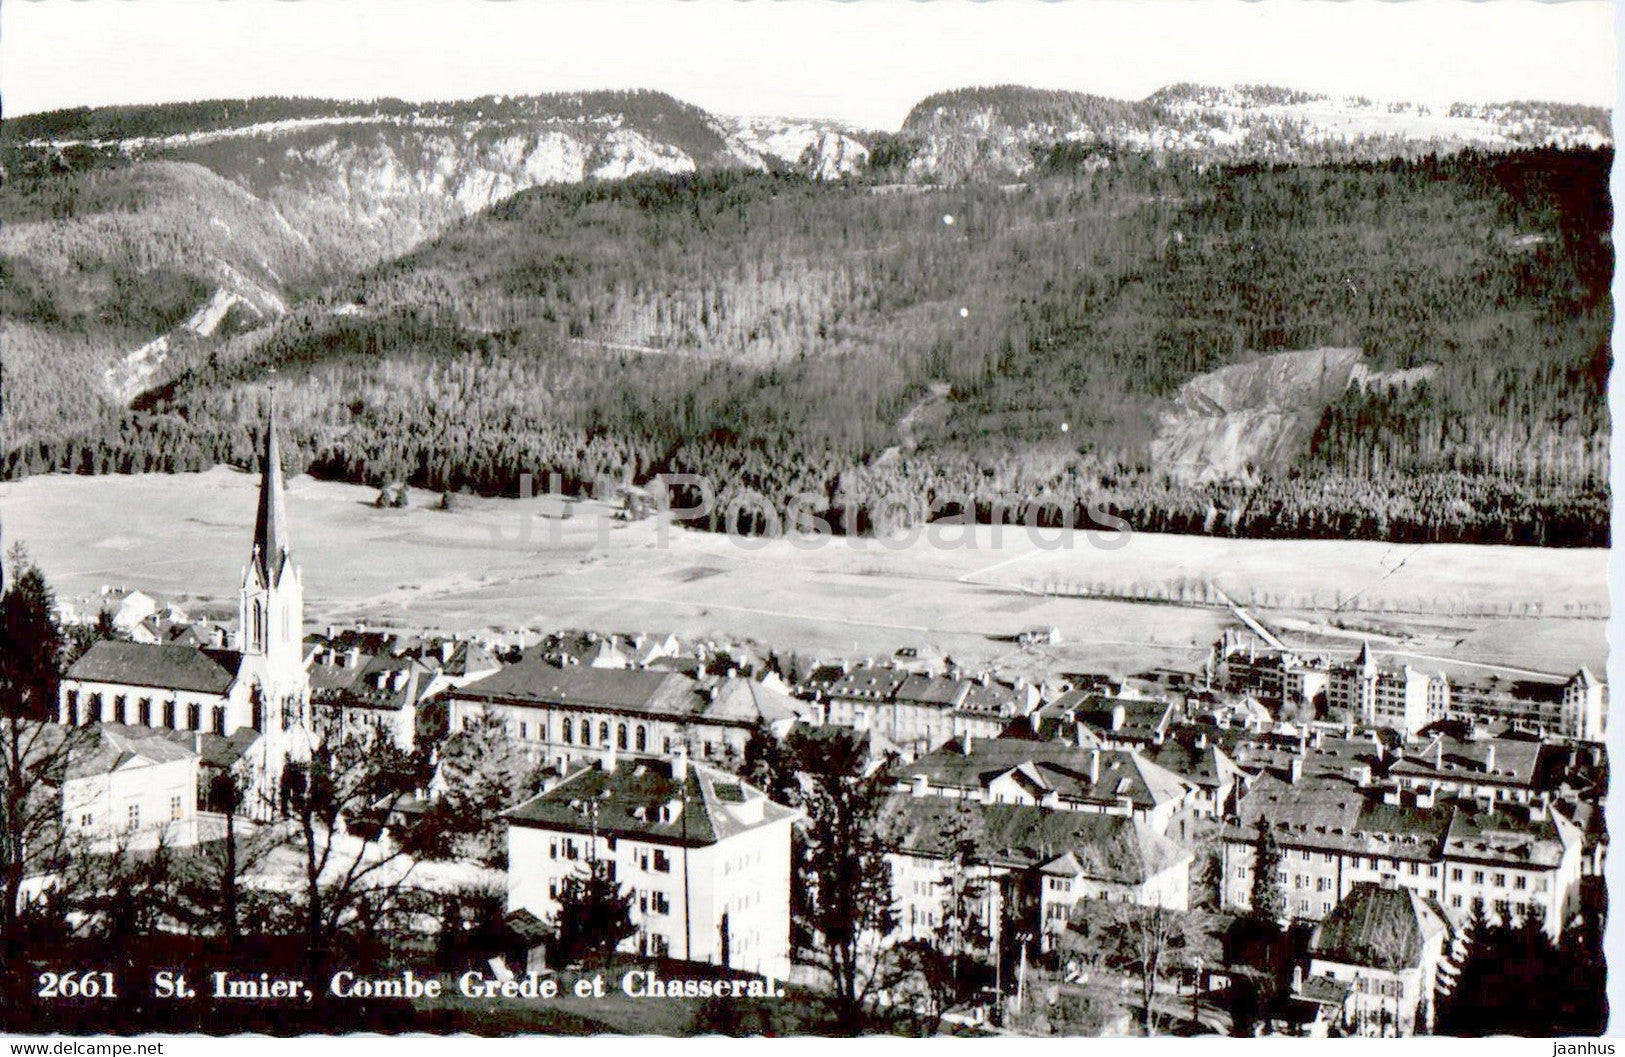 St Imier - Combe Grede et Chasseral - 2661 - old postcard - 1955 - Switzerland - used - JH Postcards